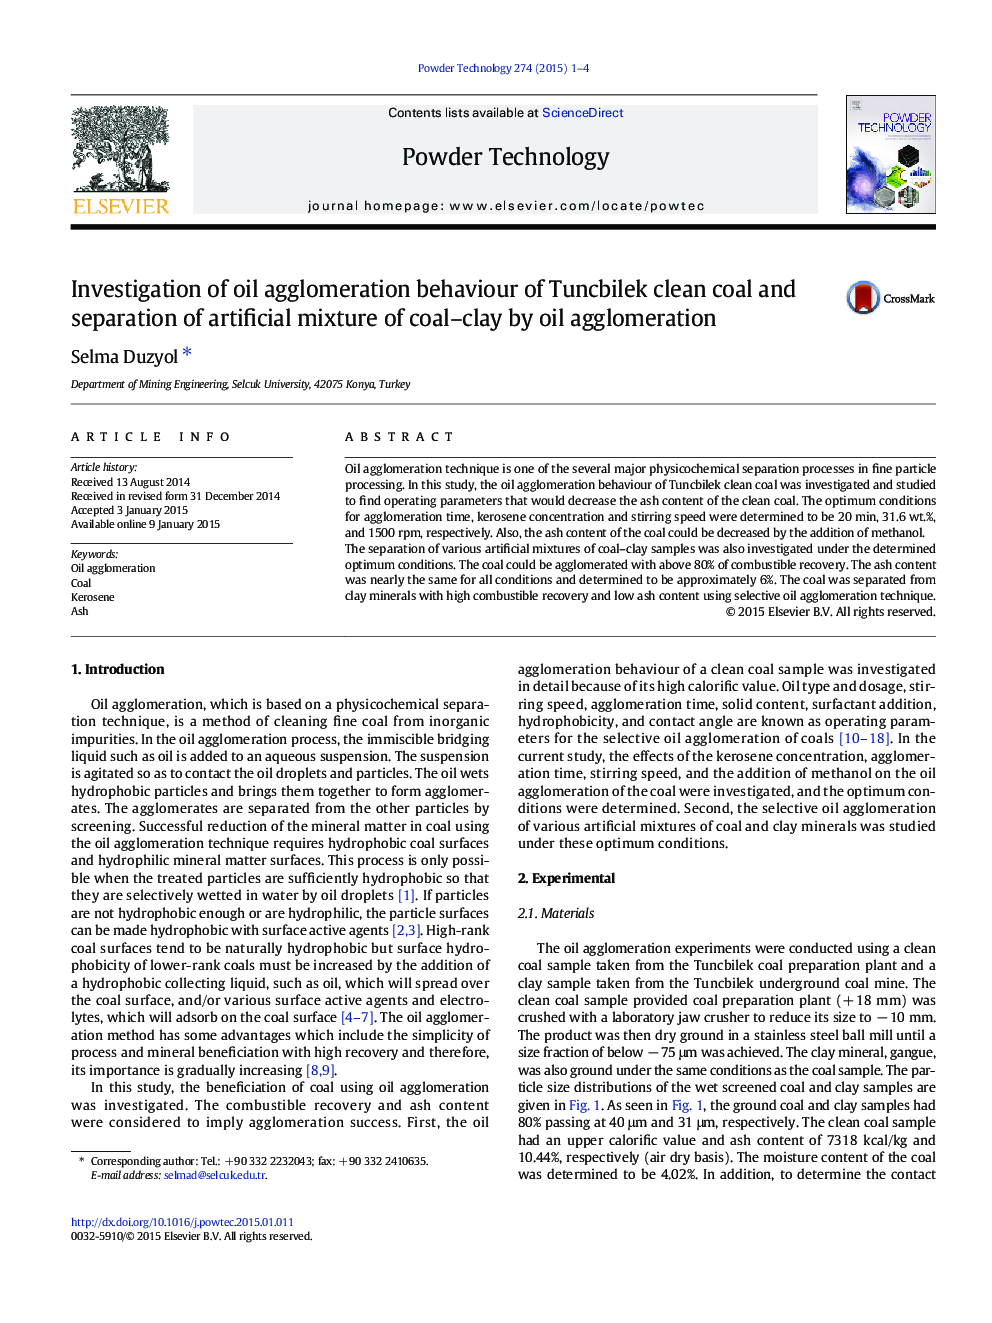 Investigation of oil agglomeration behaviour of Tuncbilek clean coal and separation of artificial mixture of coal–clay by oil agglomeration